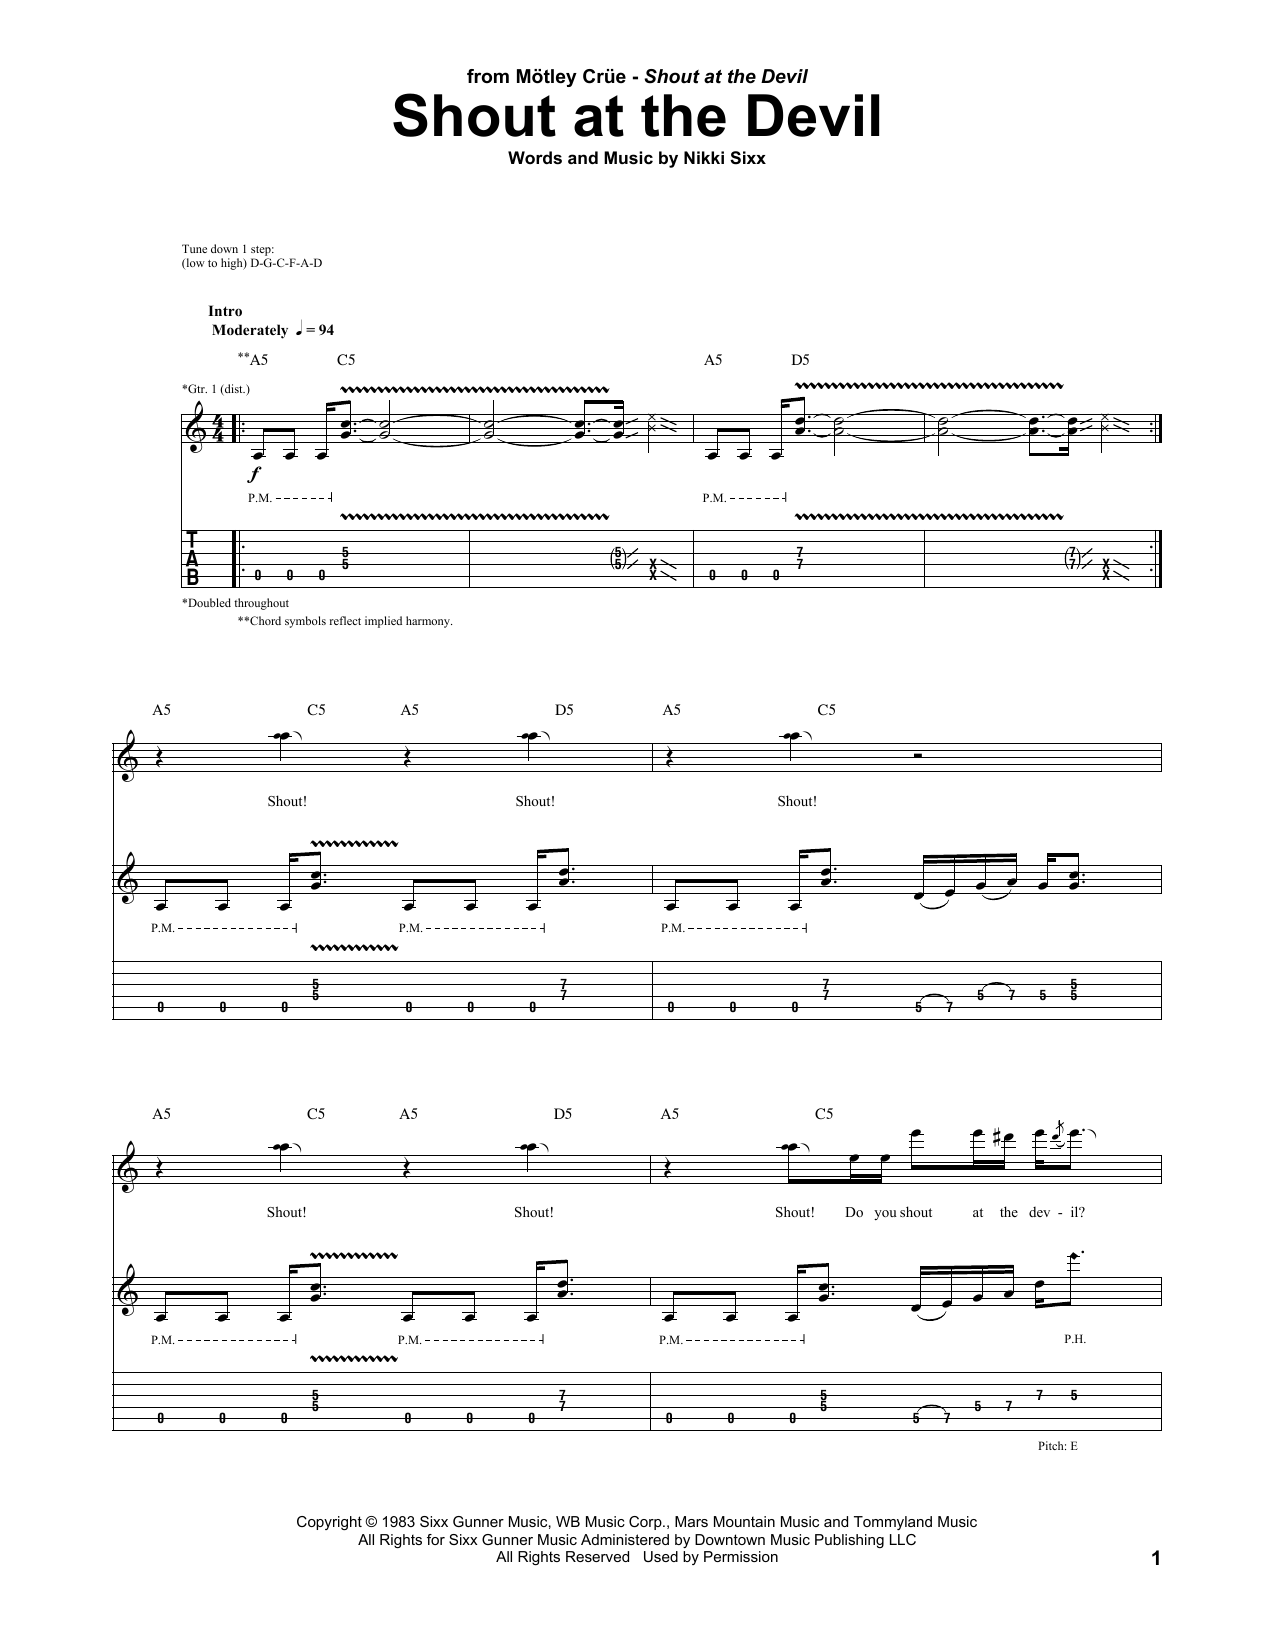 Motley Crue Shout At The Devil sheet music notes and chords. Download Printable PDF.